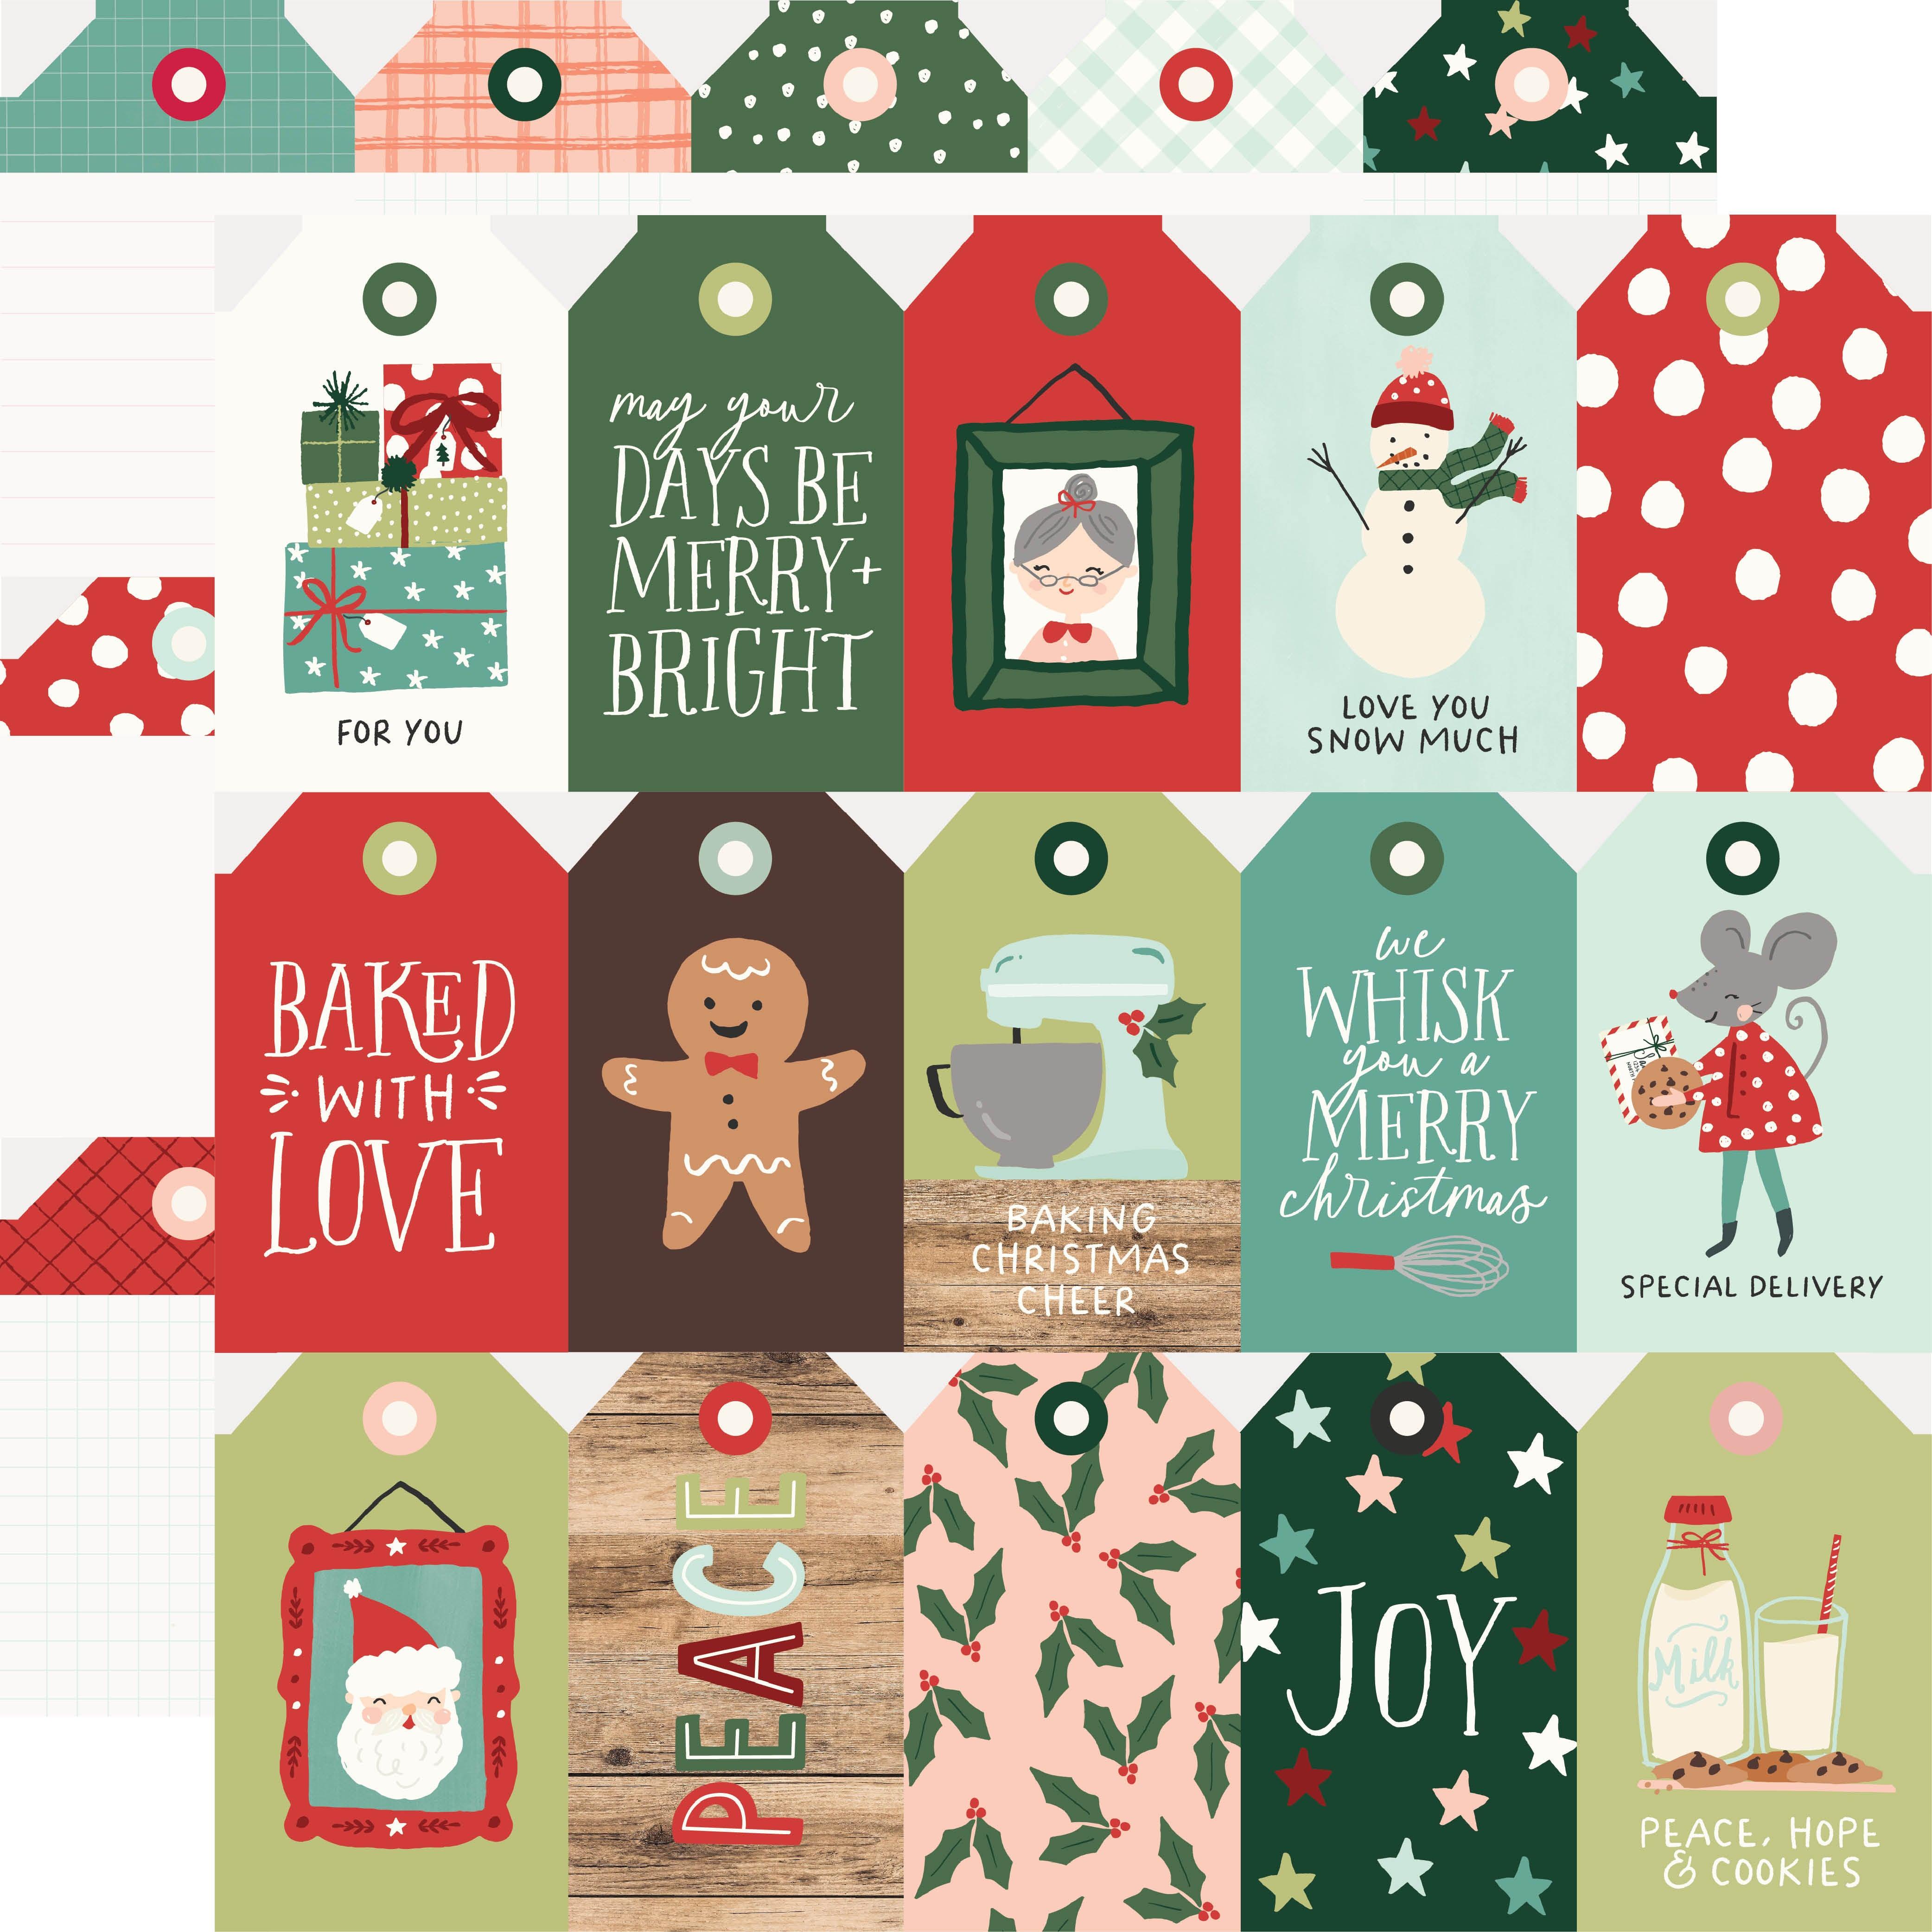 Baking Spirits Bright Collection Tags 12 x 12 Double-Sided Scrapbook Paper by Simple Stories - Scrapbook Supply Companies